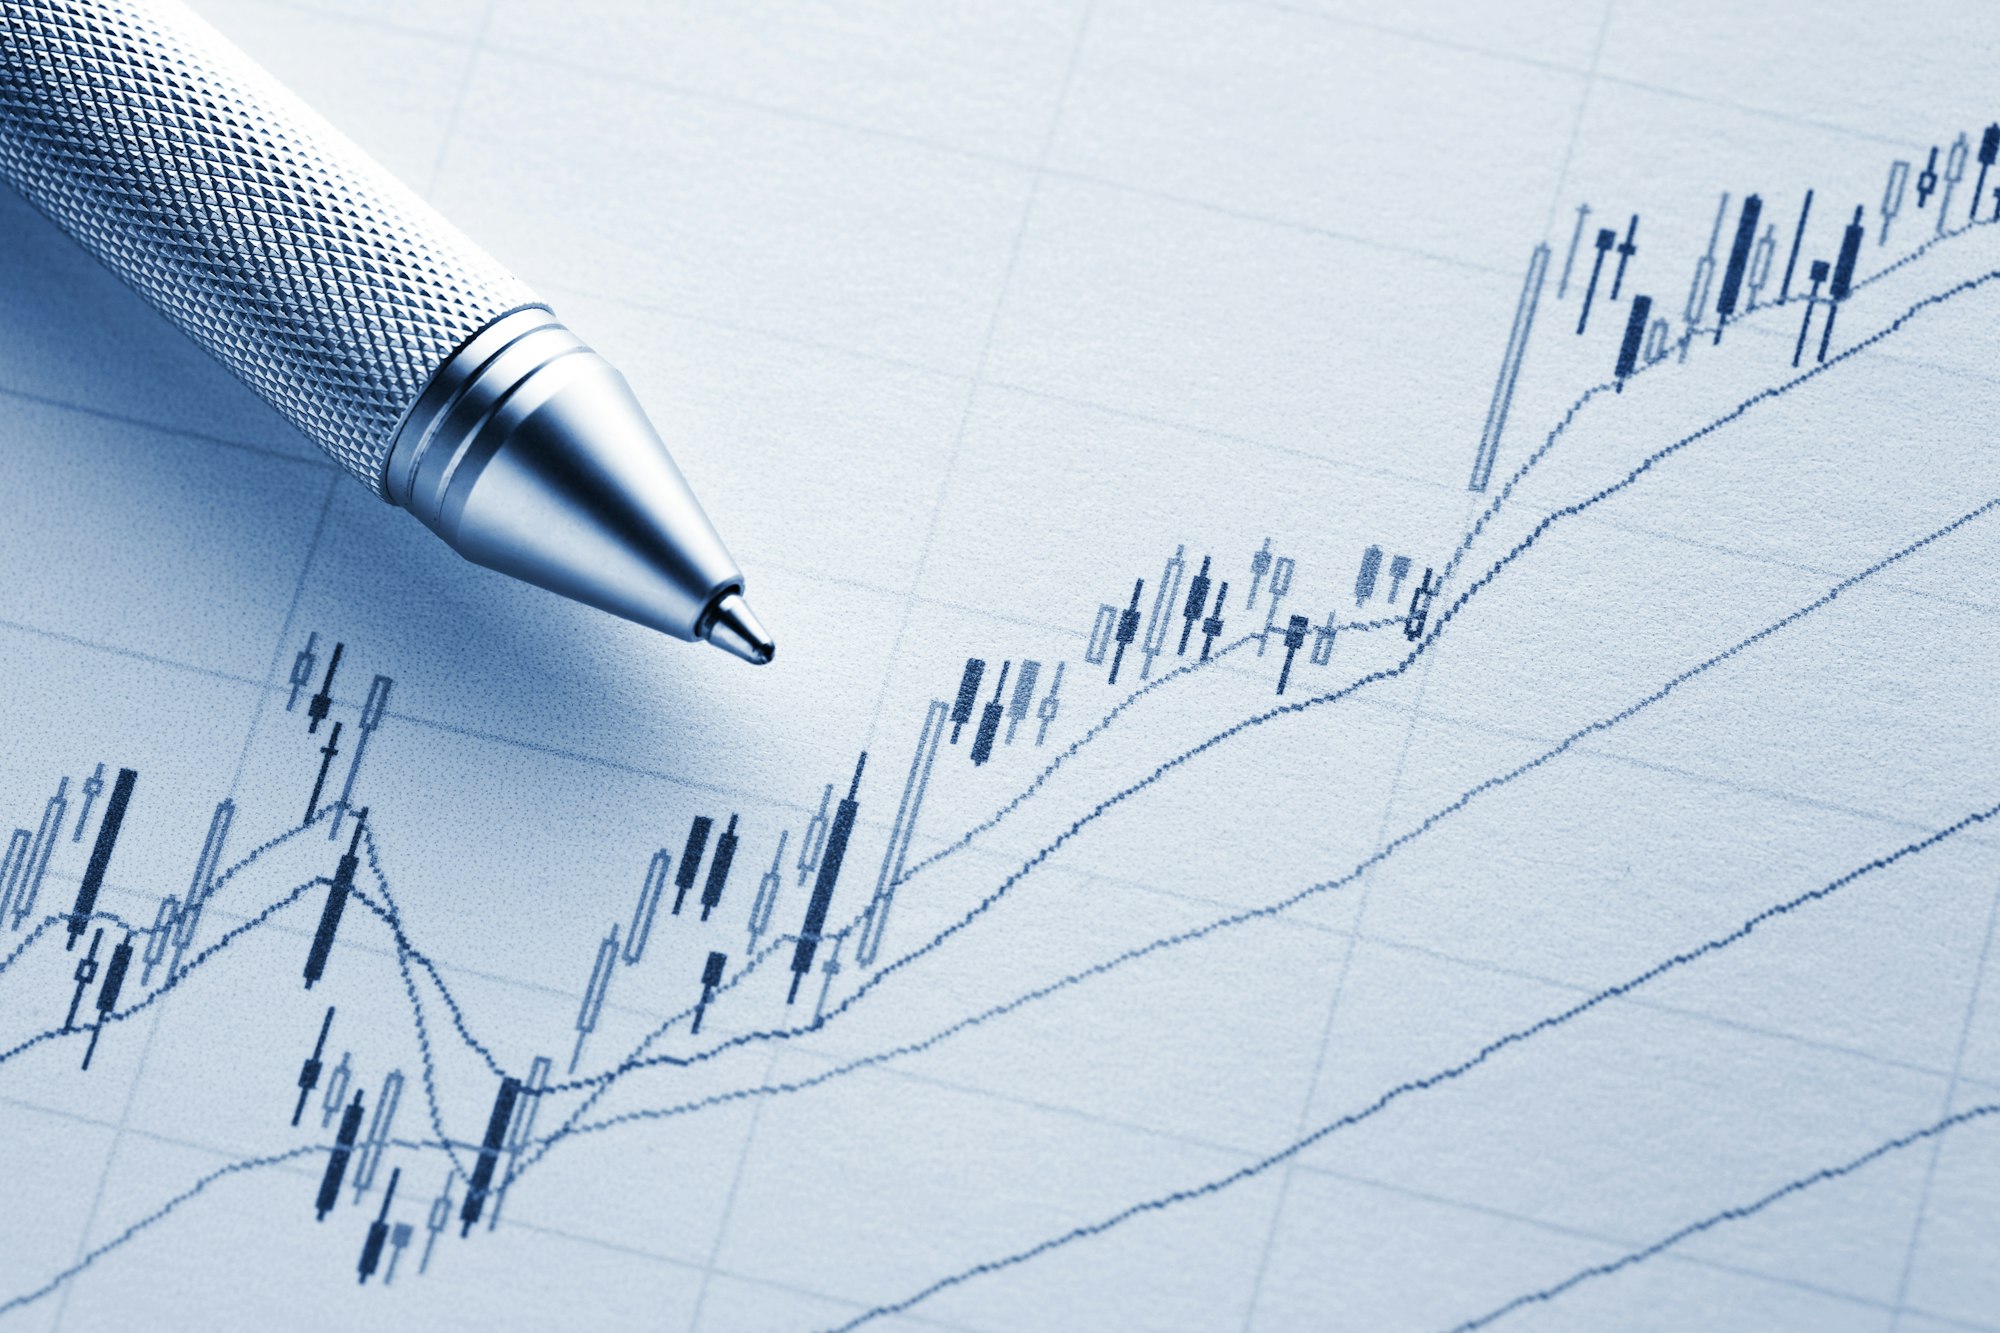 Increasing stock market graph with pen